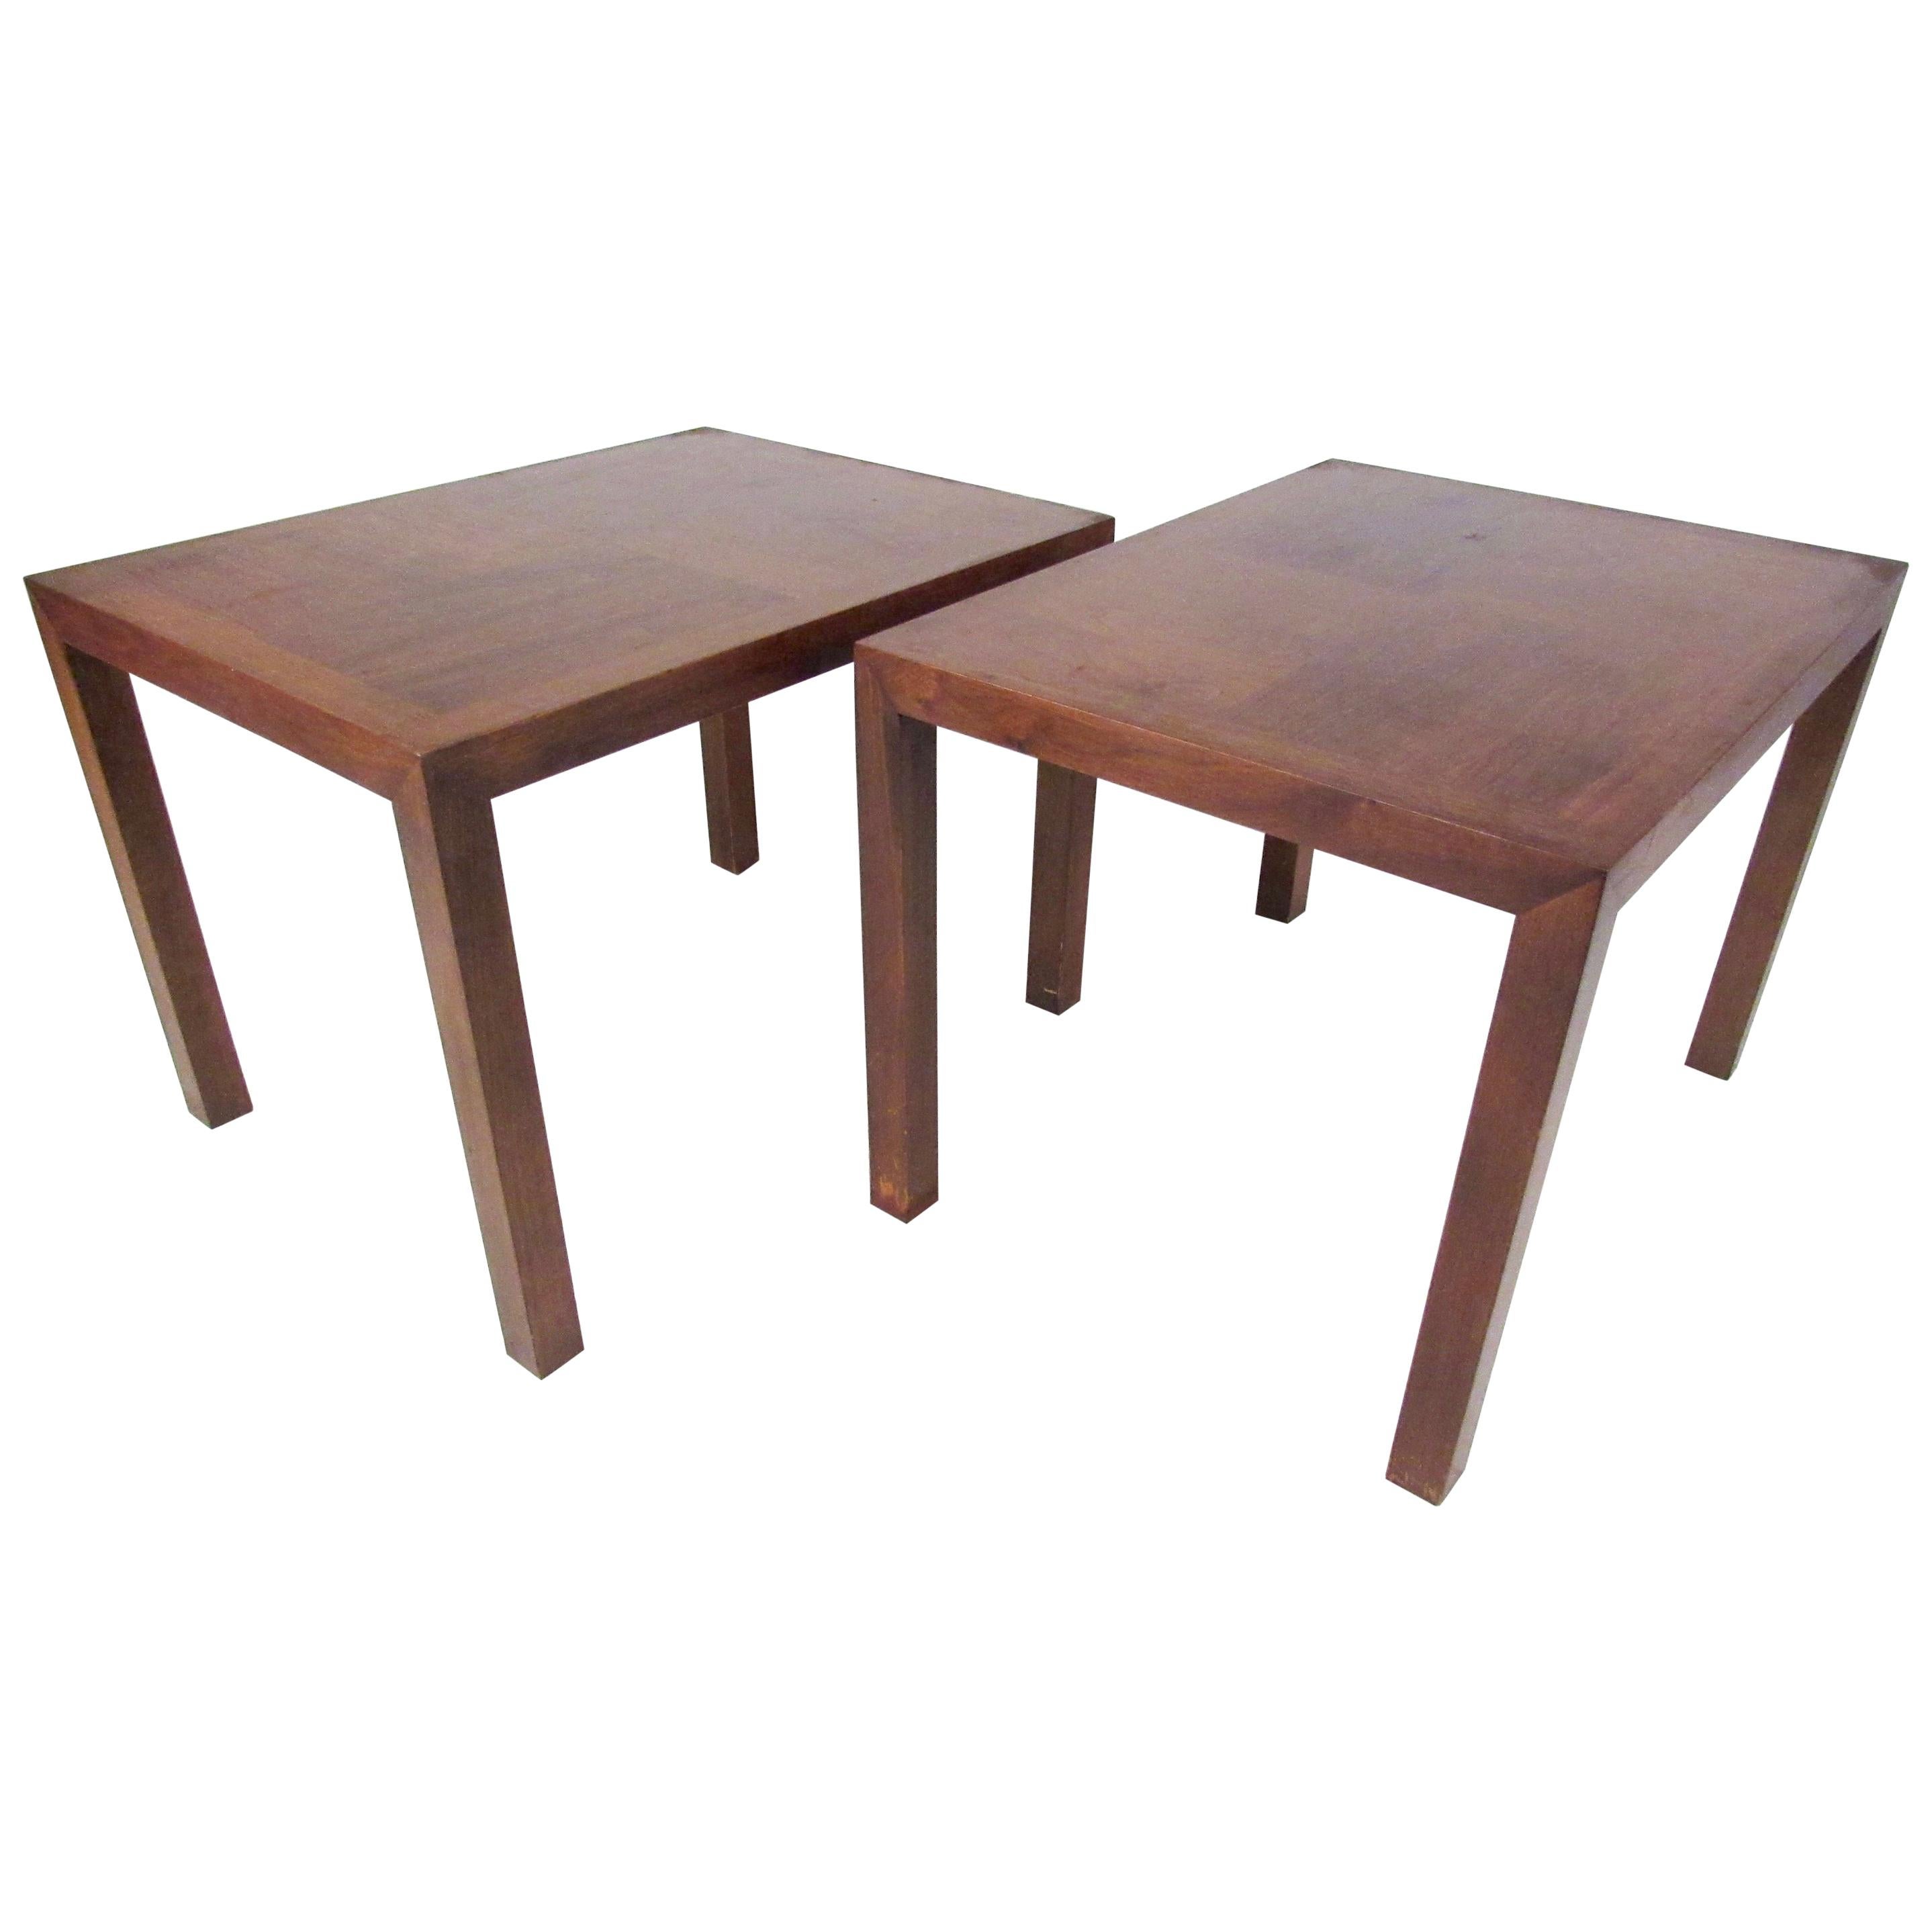 Pair of Parsons Style Walnut Lamp Tables by Lane